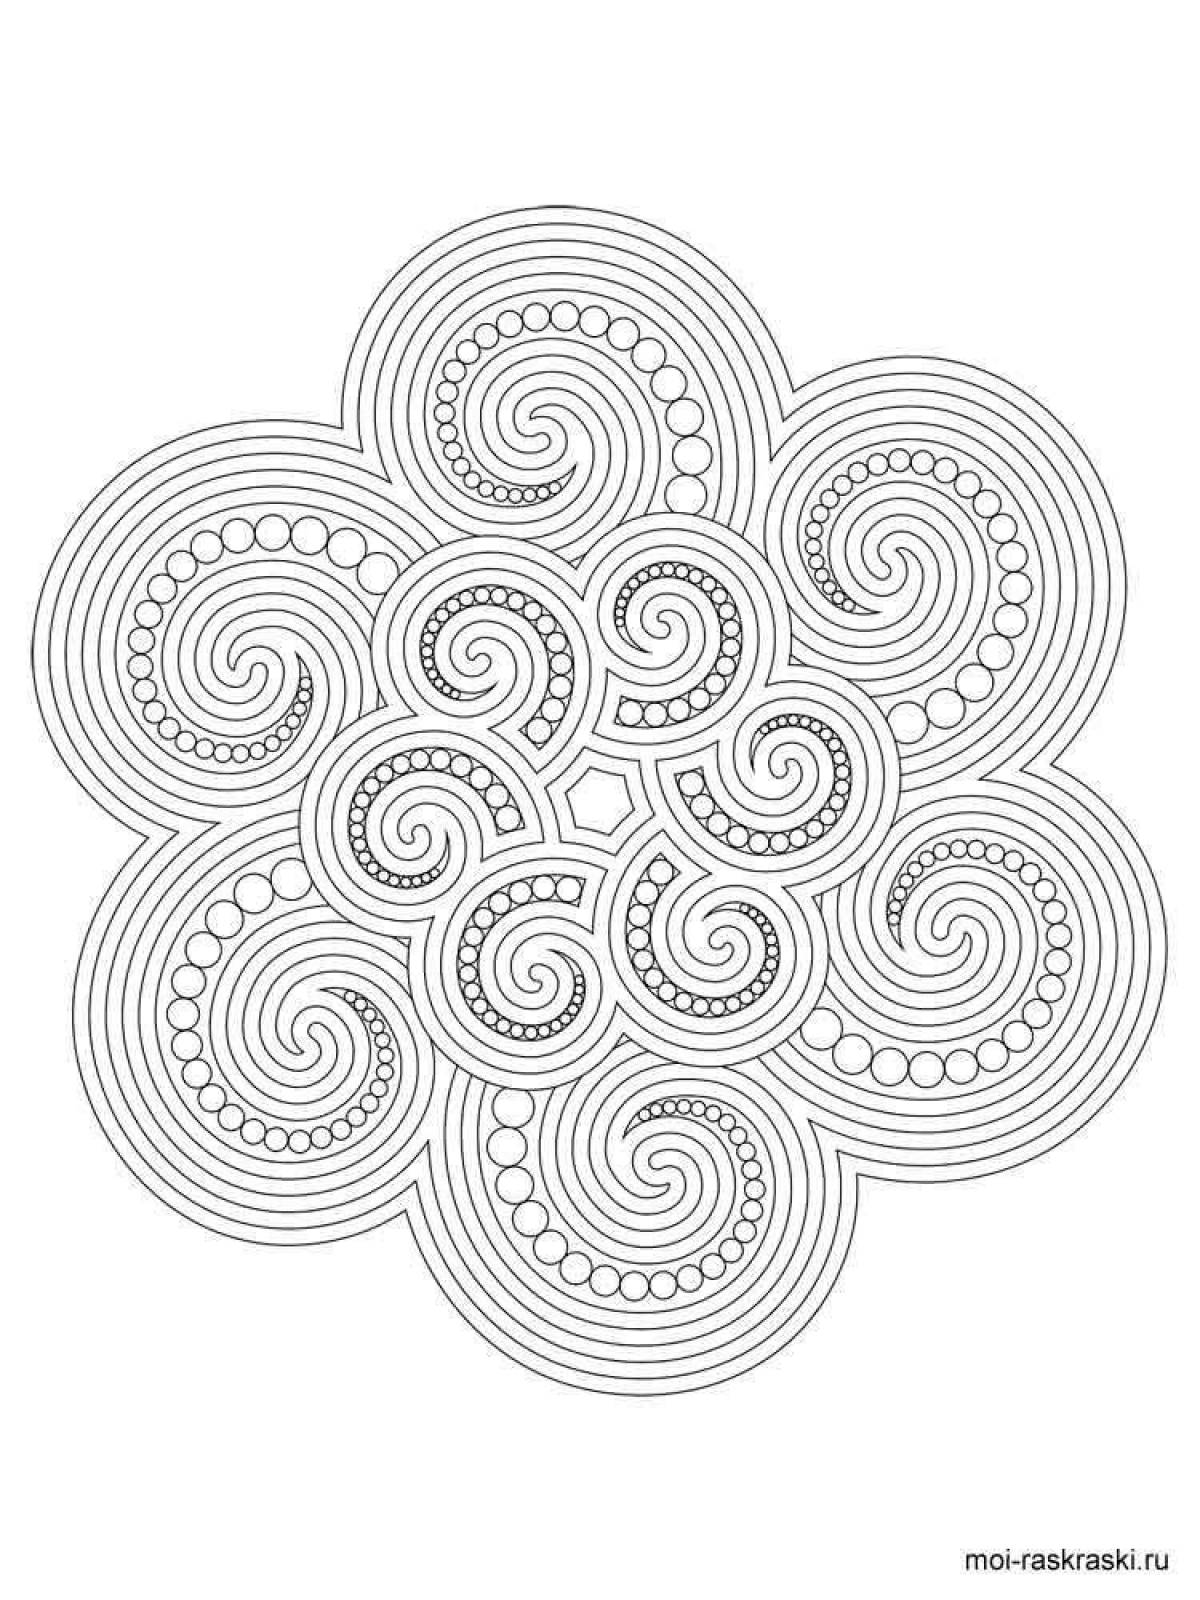 Coloring page fascinating anti-stress spirals